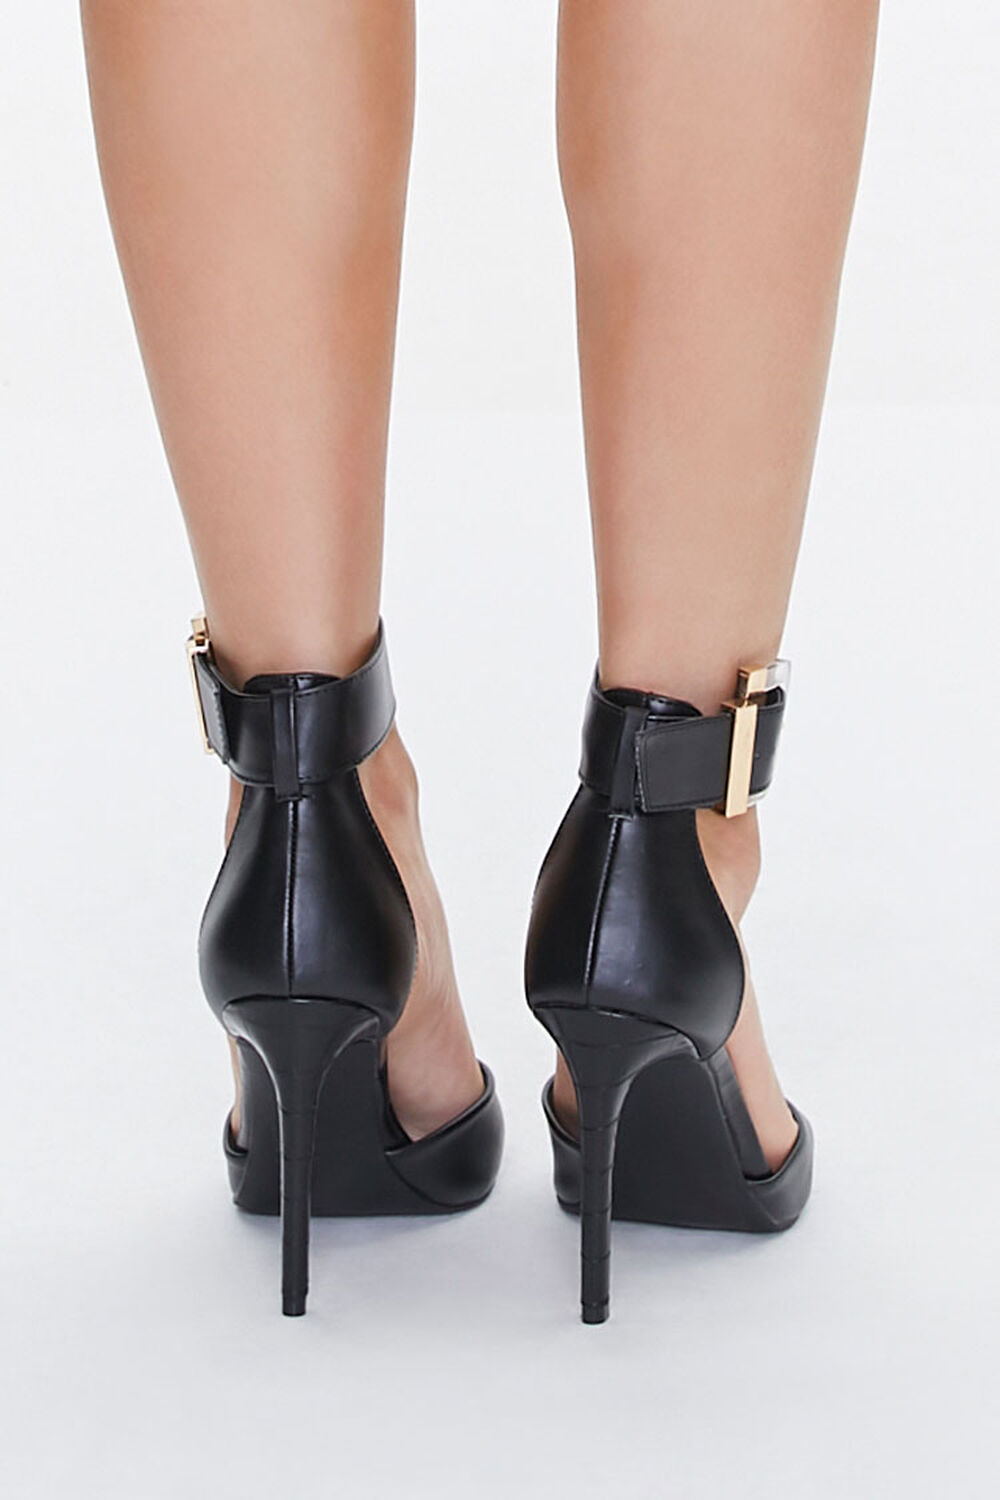 Pointed Toe Stiletto Pumps, image 3